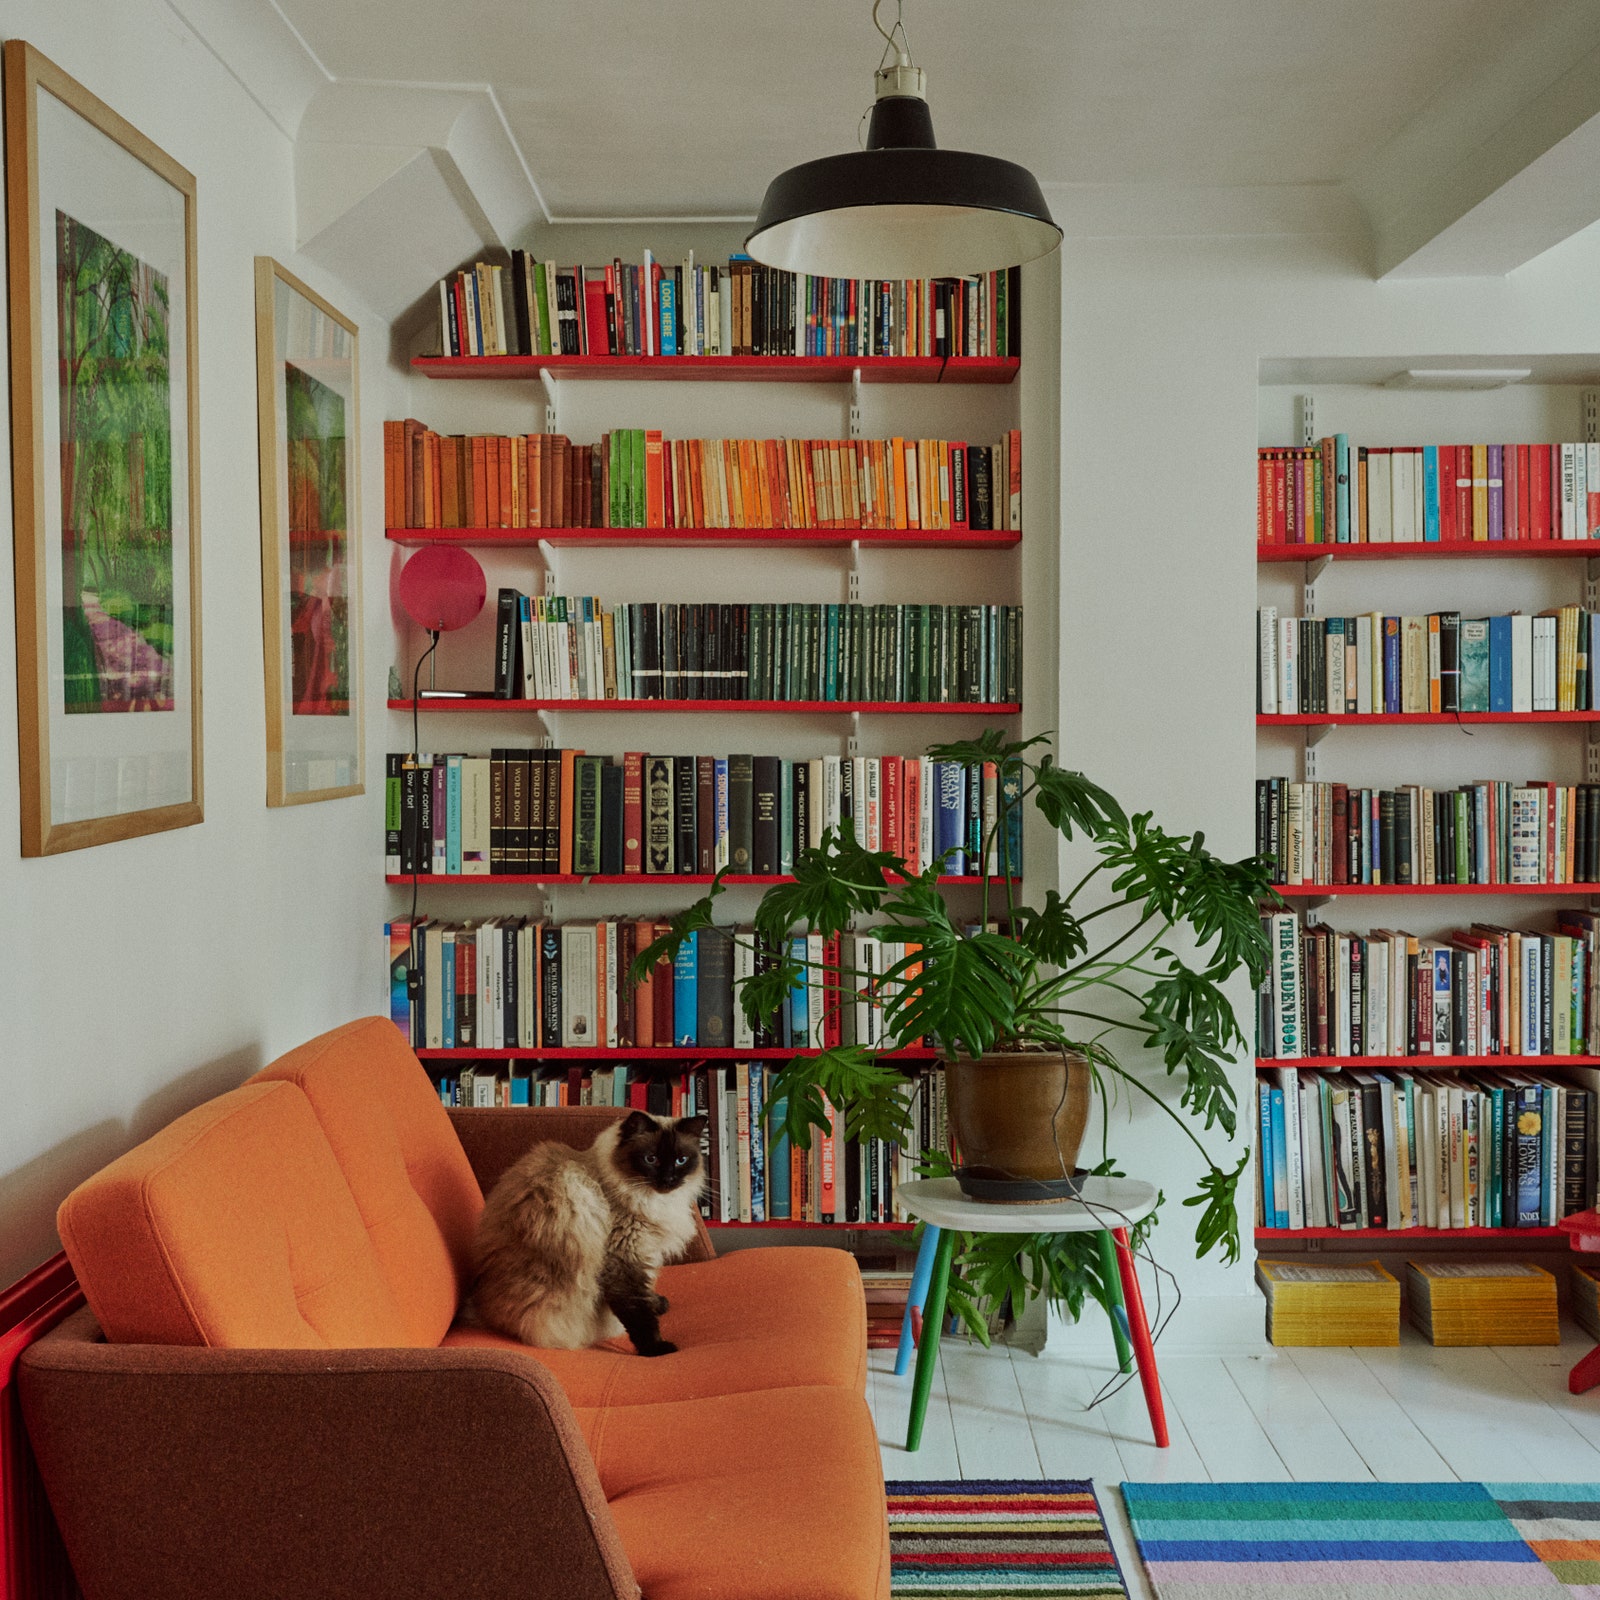 A once dingy maisonette brought to life with a fearless approach to colour and creativity